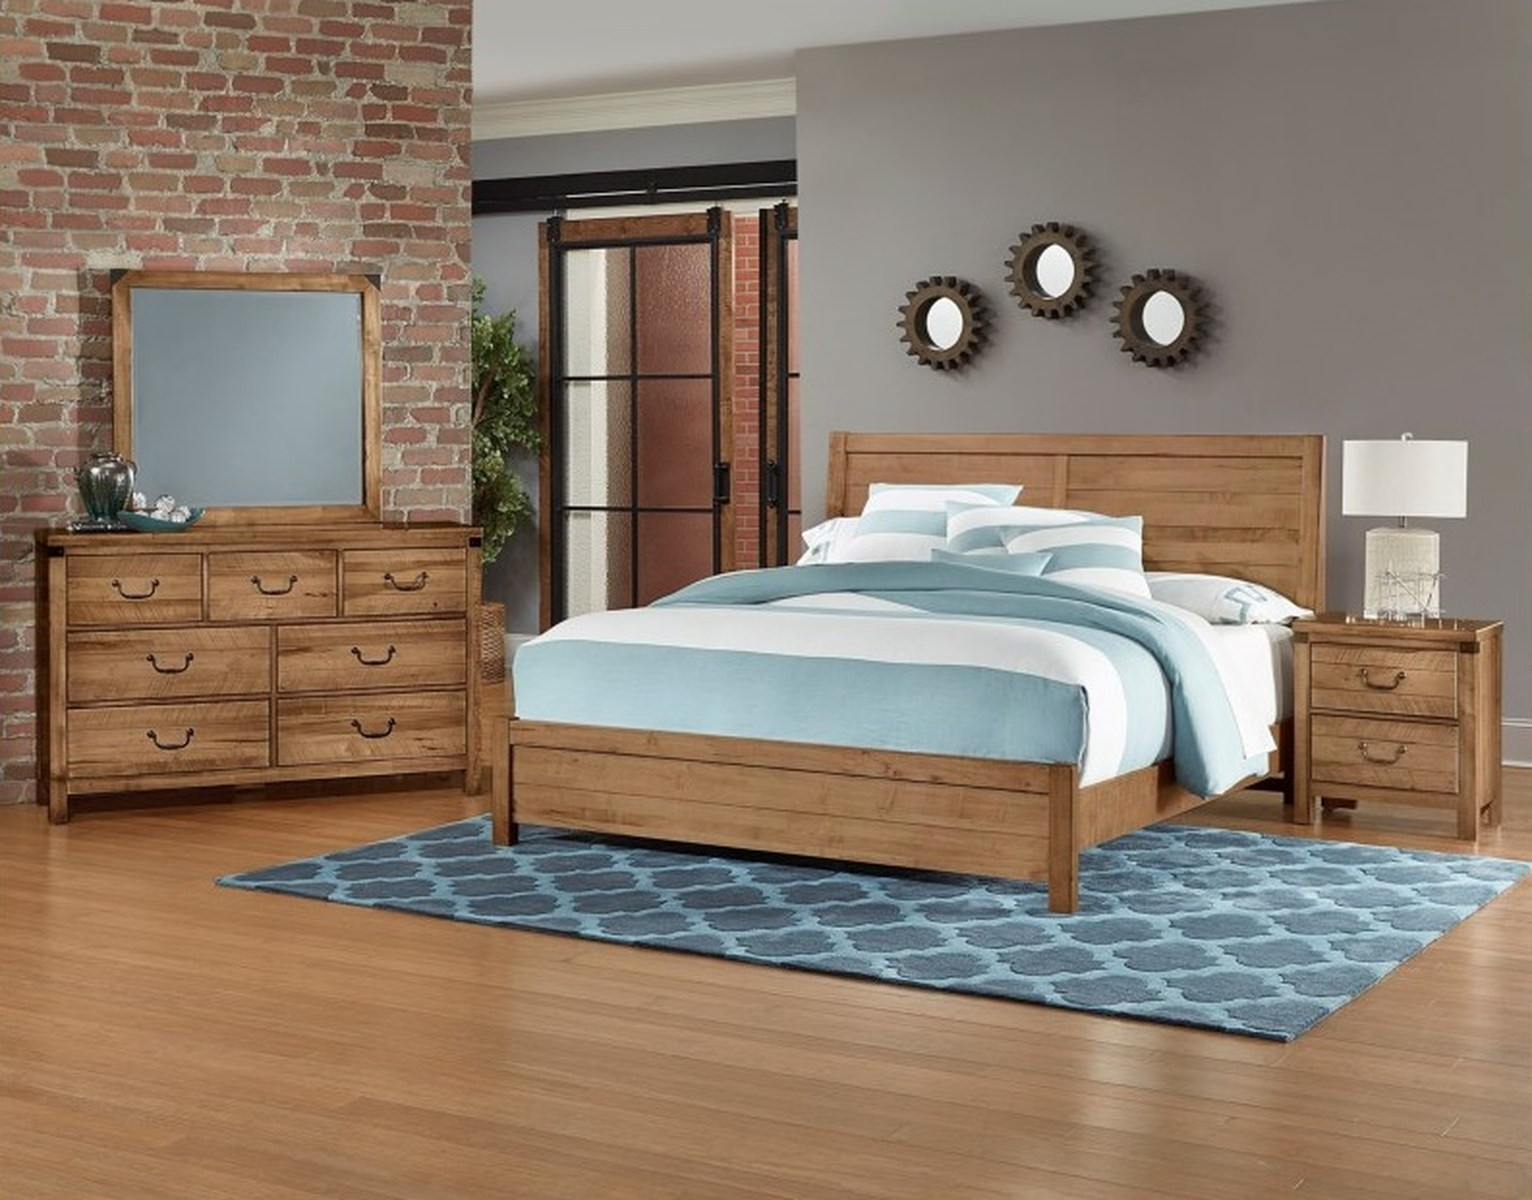 Vaughan Bassett Sedgwick 4 Piece Panel Bedroom Set In Natural Maple within measurements 1532 X 1200